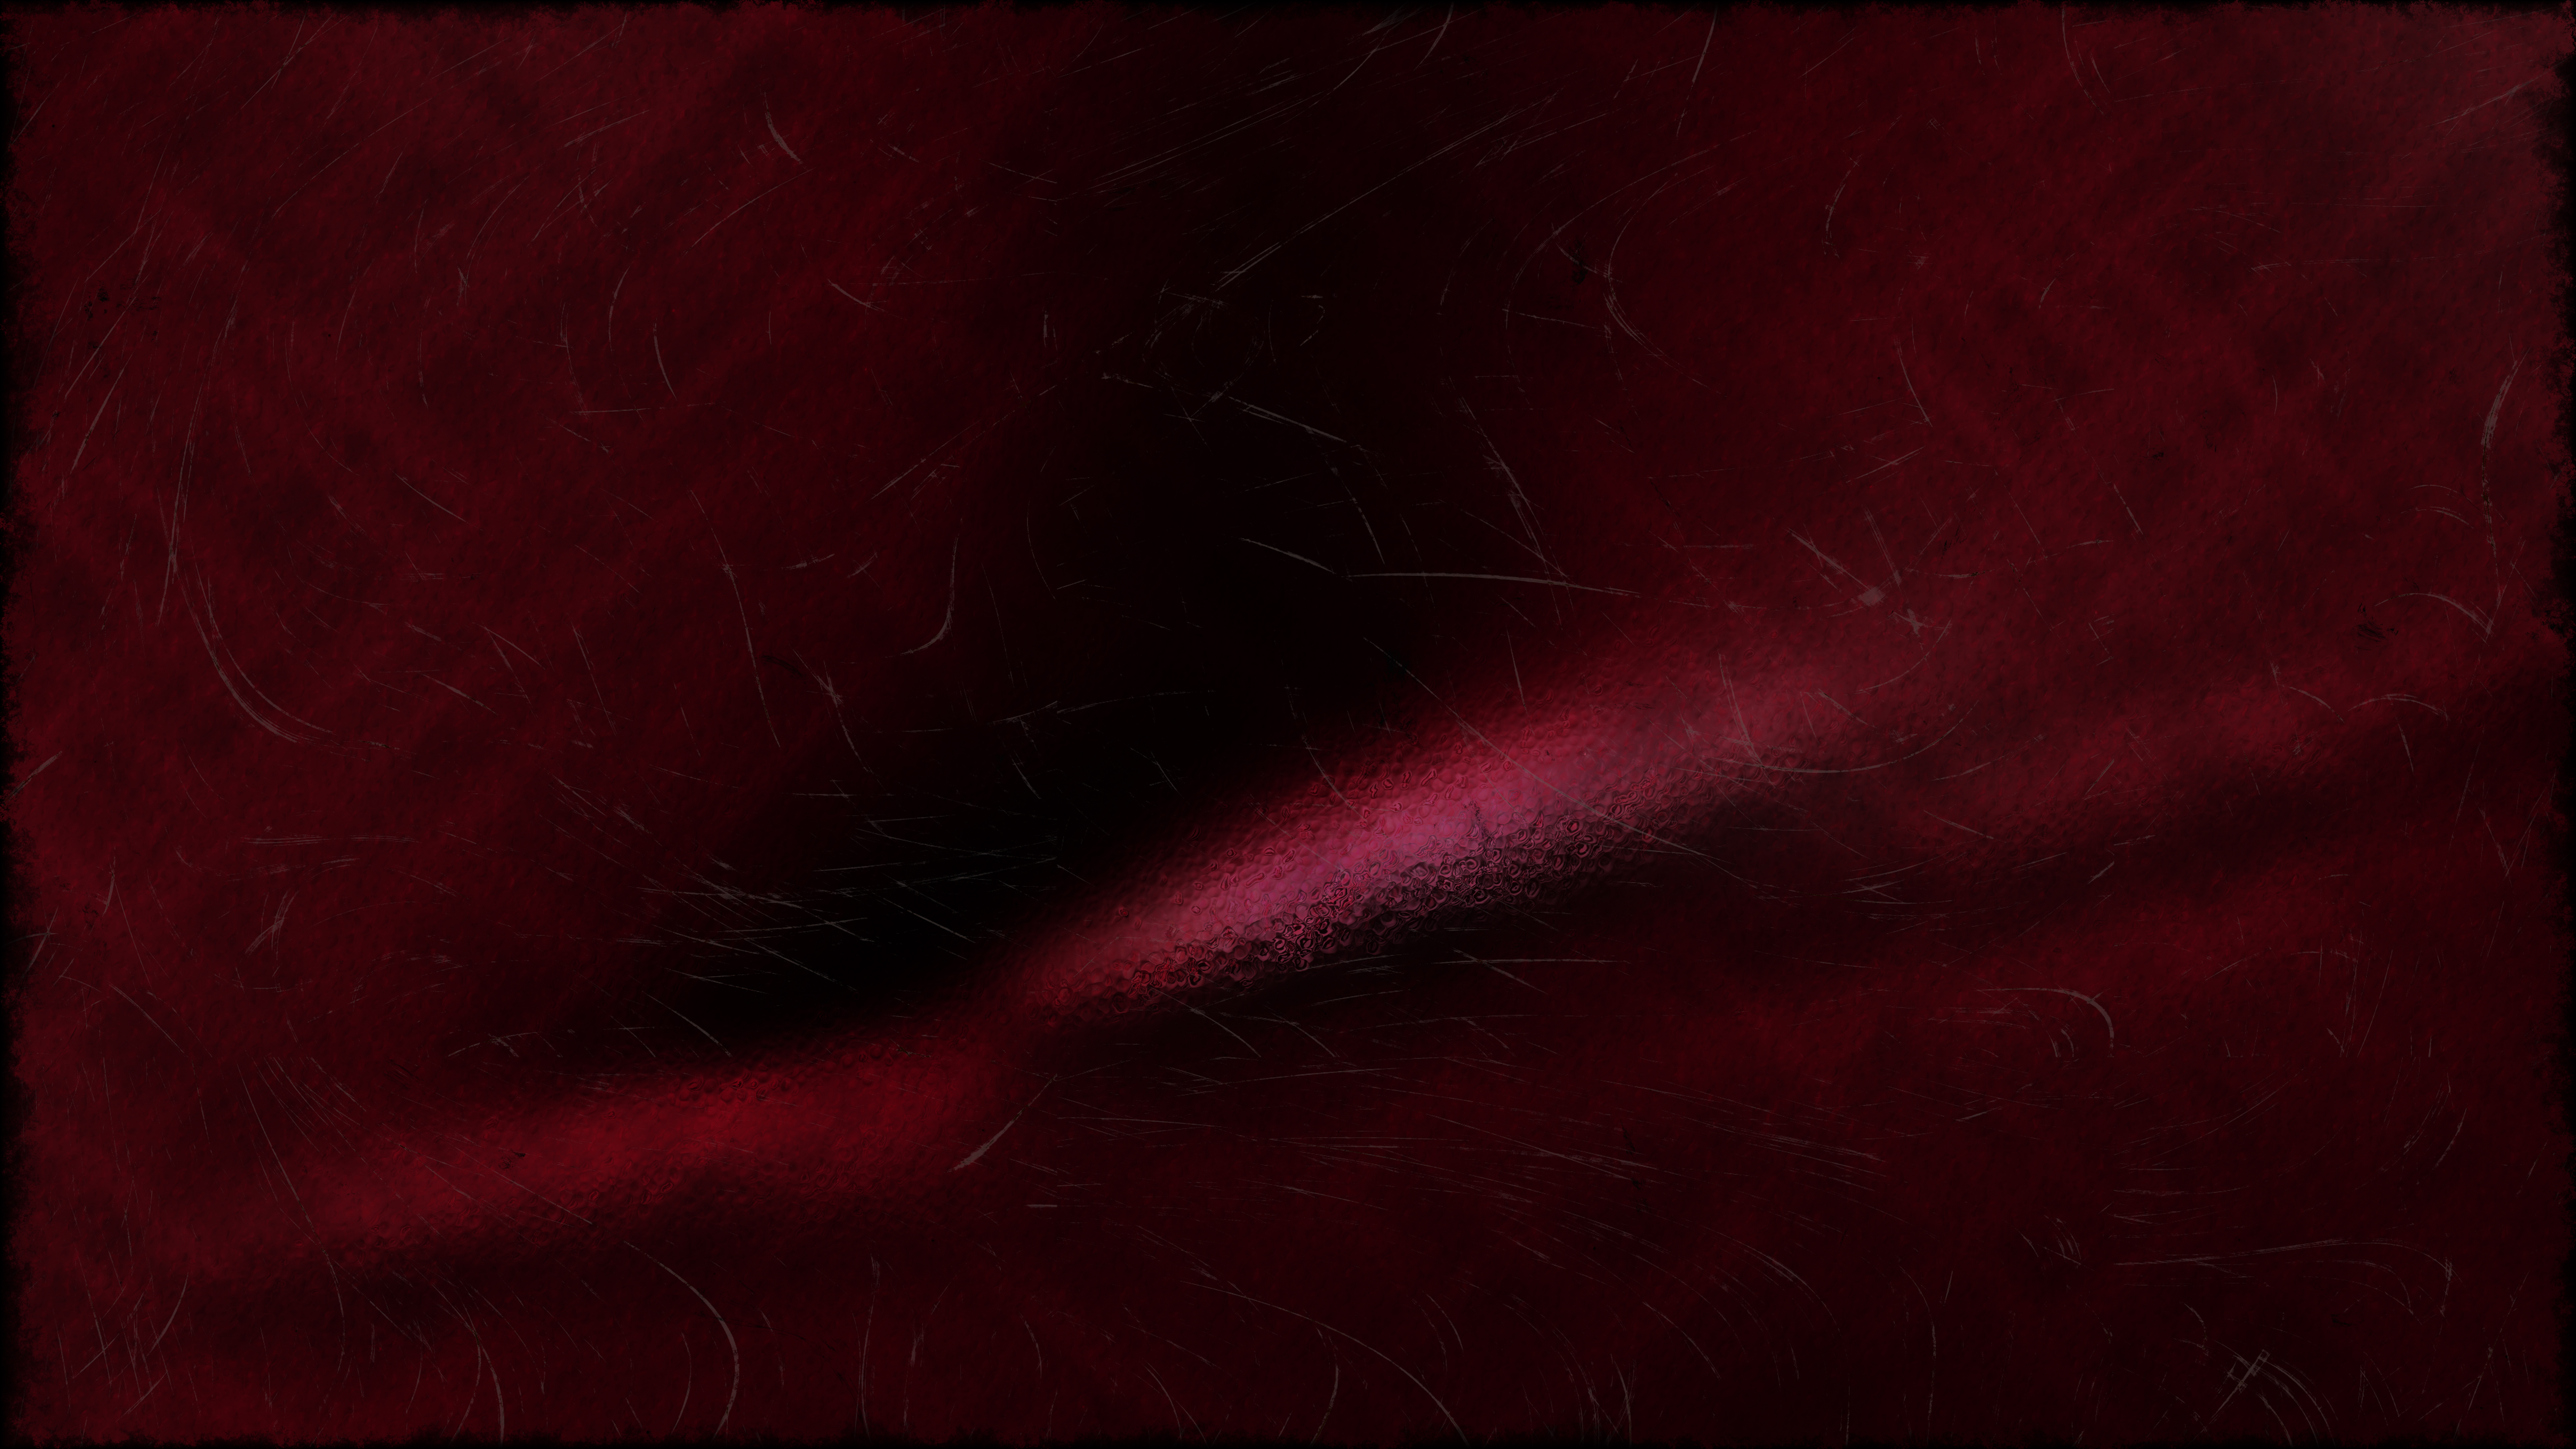 Free Abstract Red and Black Texture Background Design